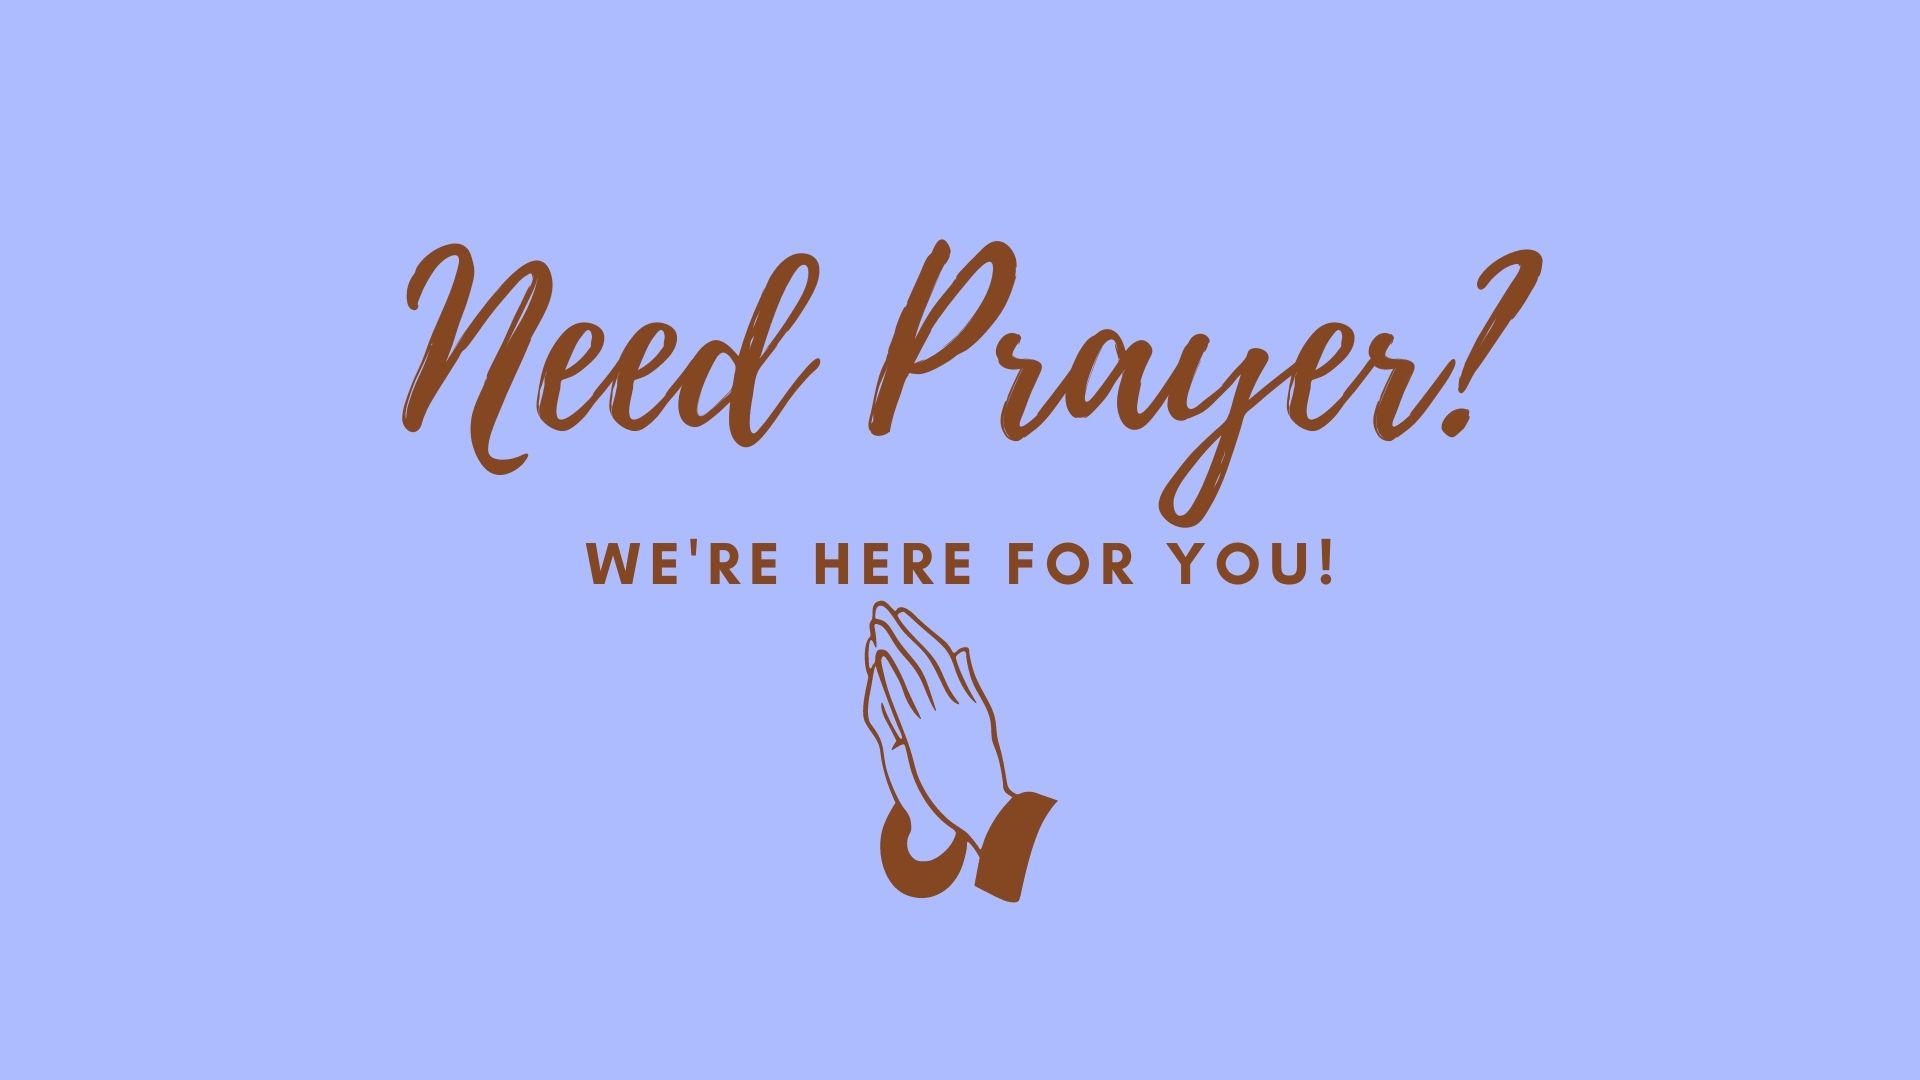 Need prayer? We’re here for you! – St. Anastasia